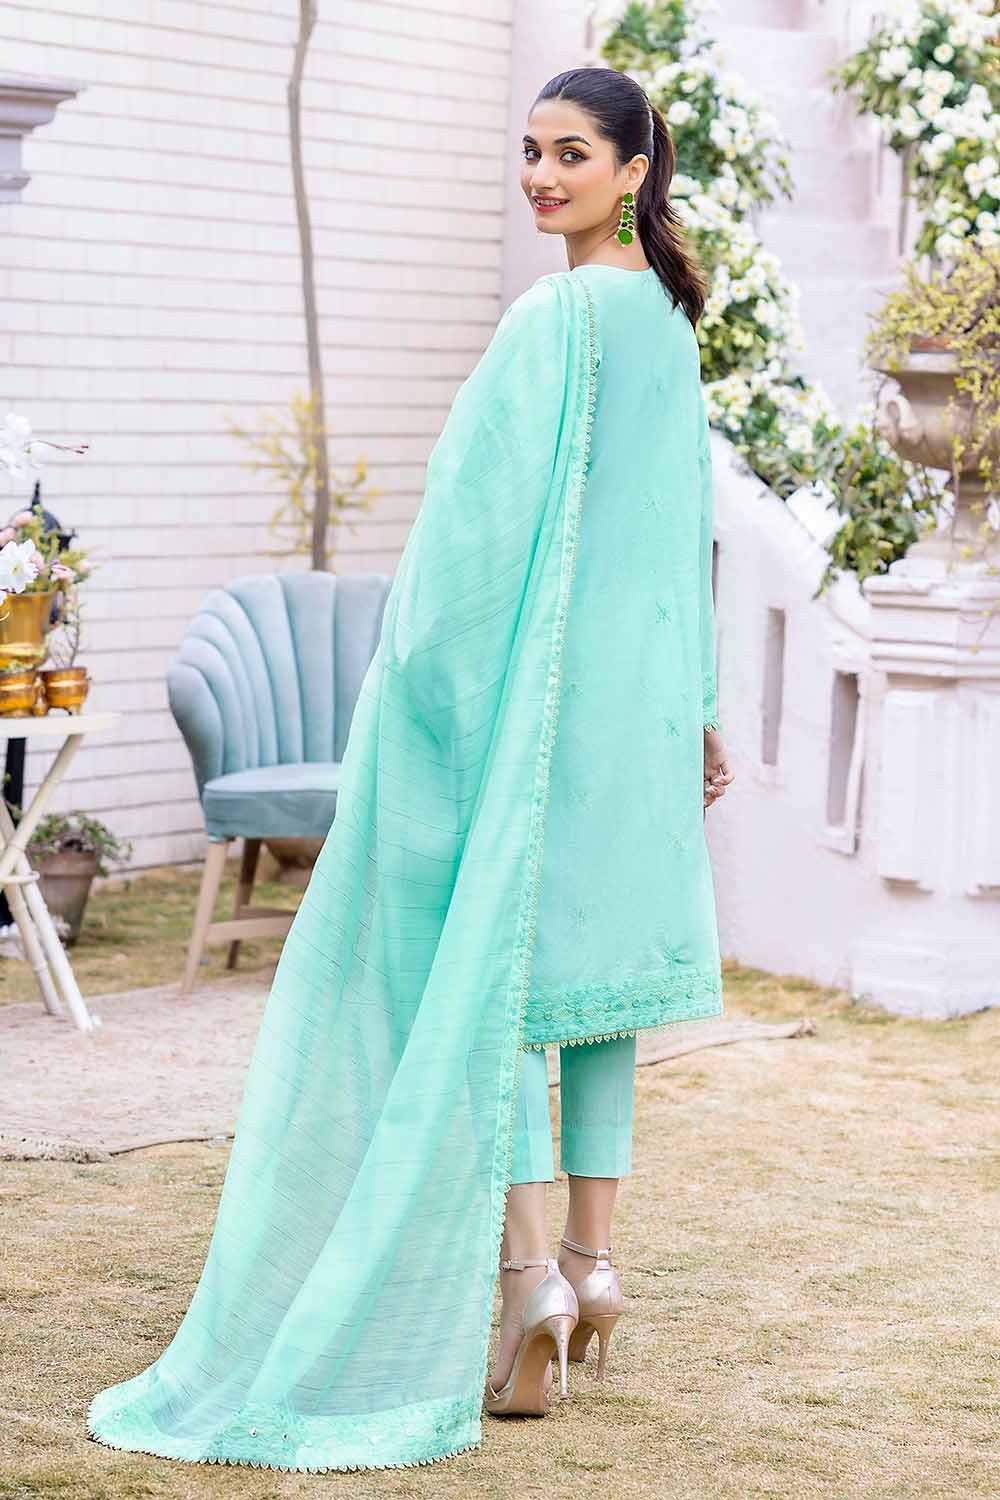 Gul Ahmed 3PC Foil Embroidered Lawn Unstitched Suit with Zari Dupatta CK-32007